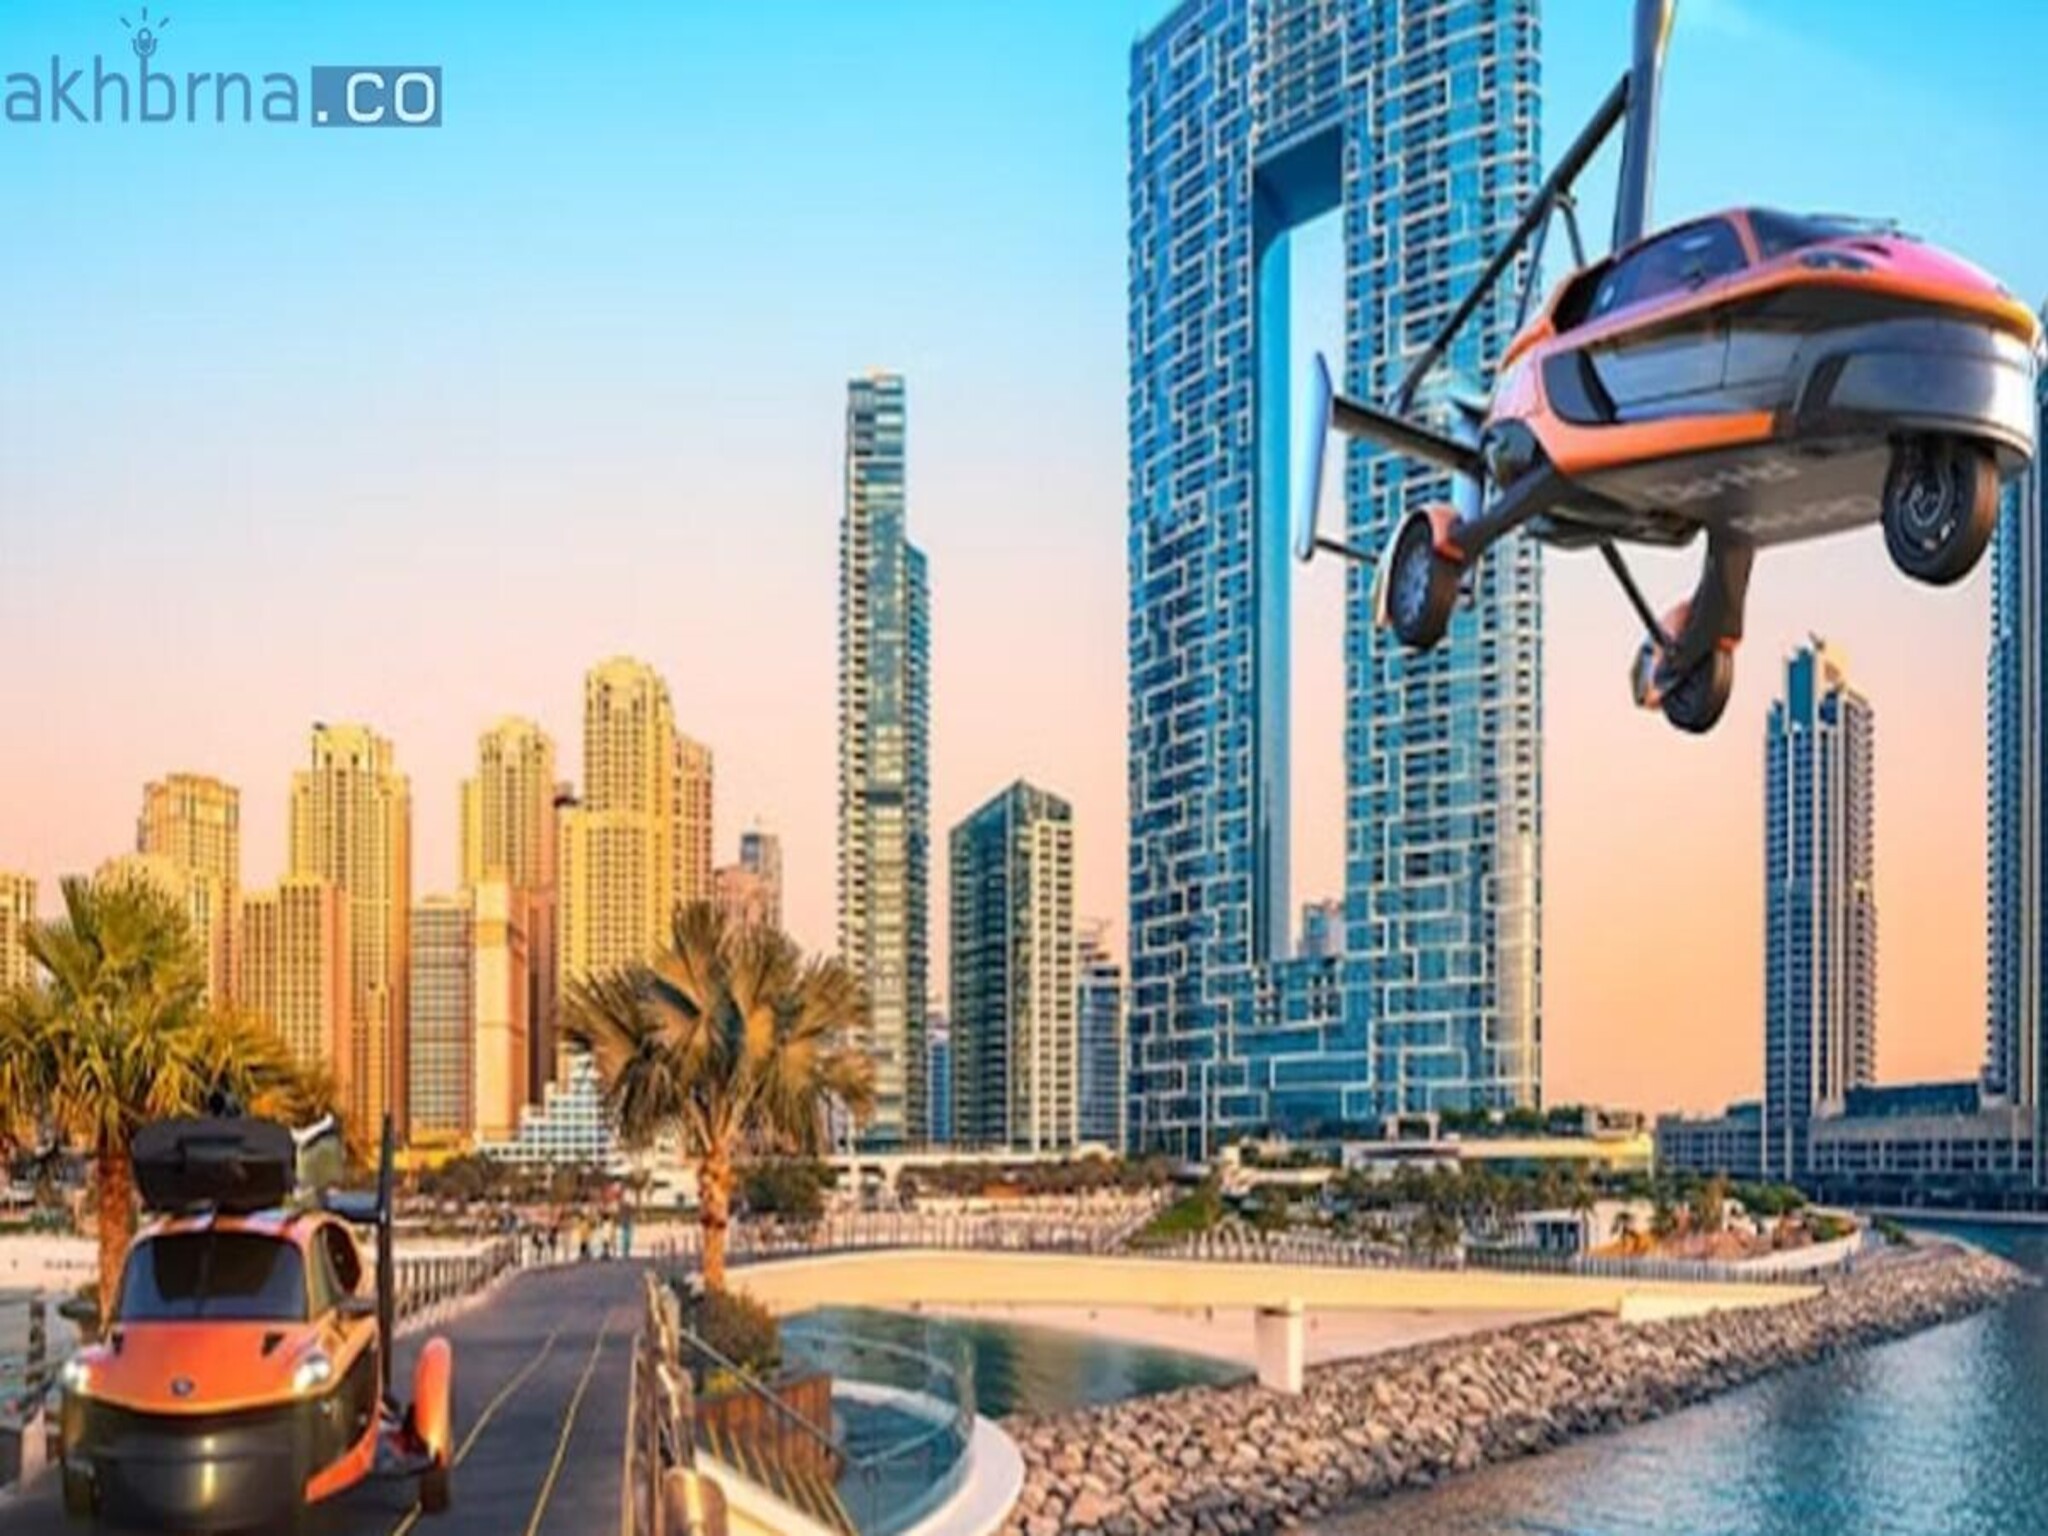 Dubai introduces Over 100 flying cars to take residents from door to door